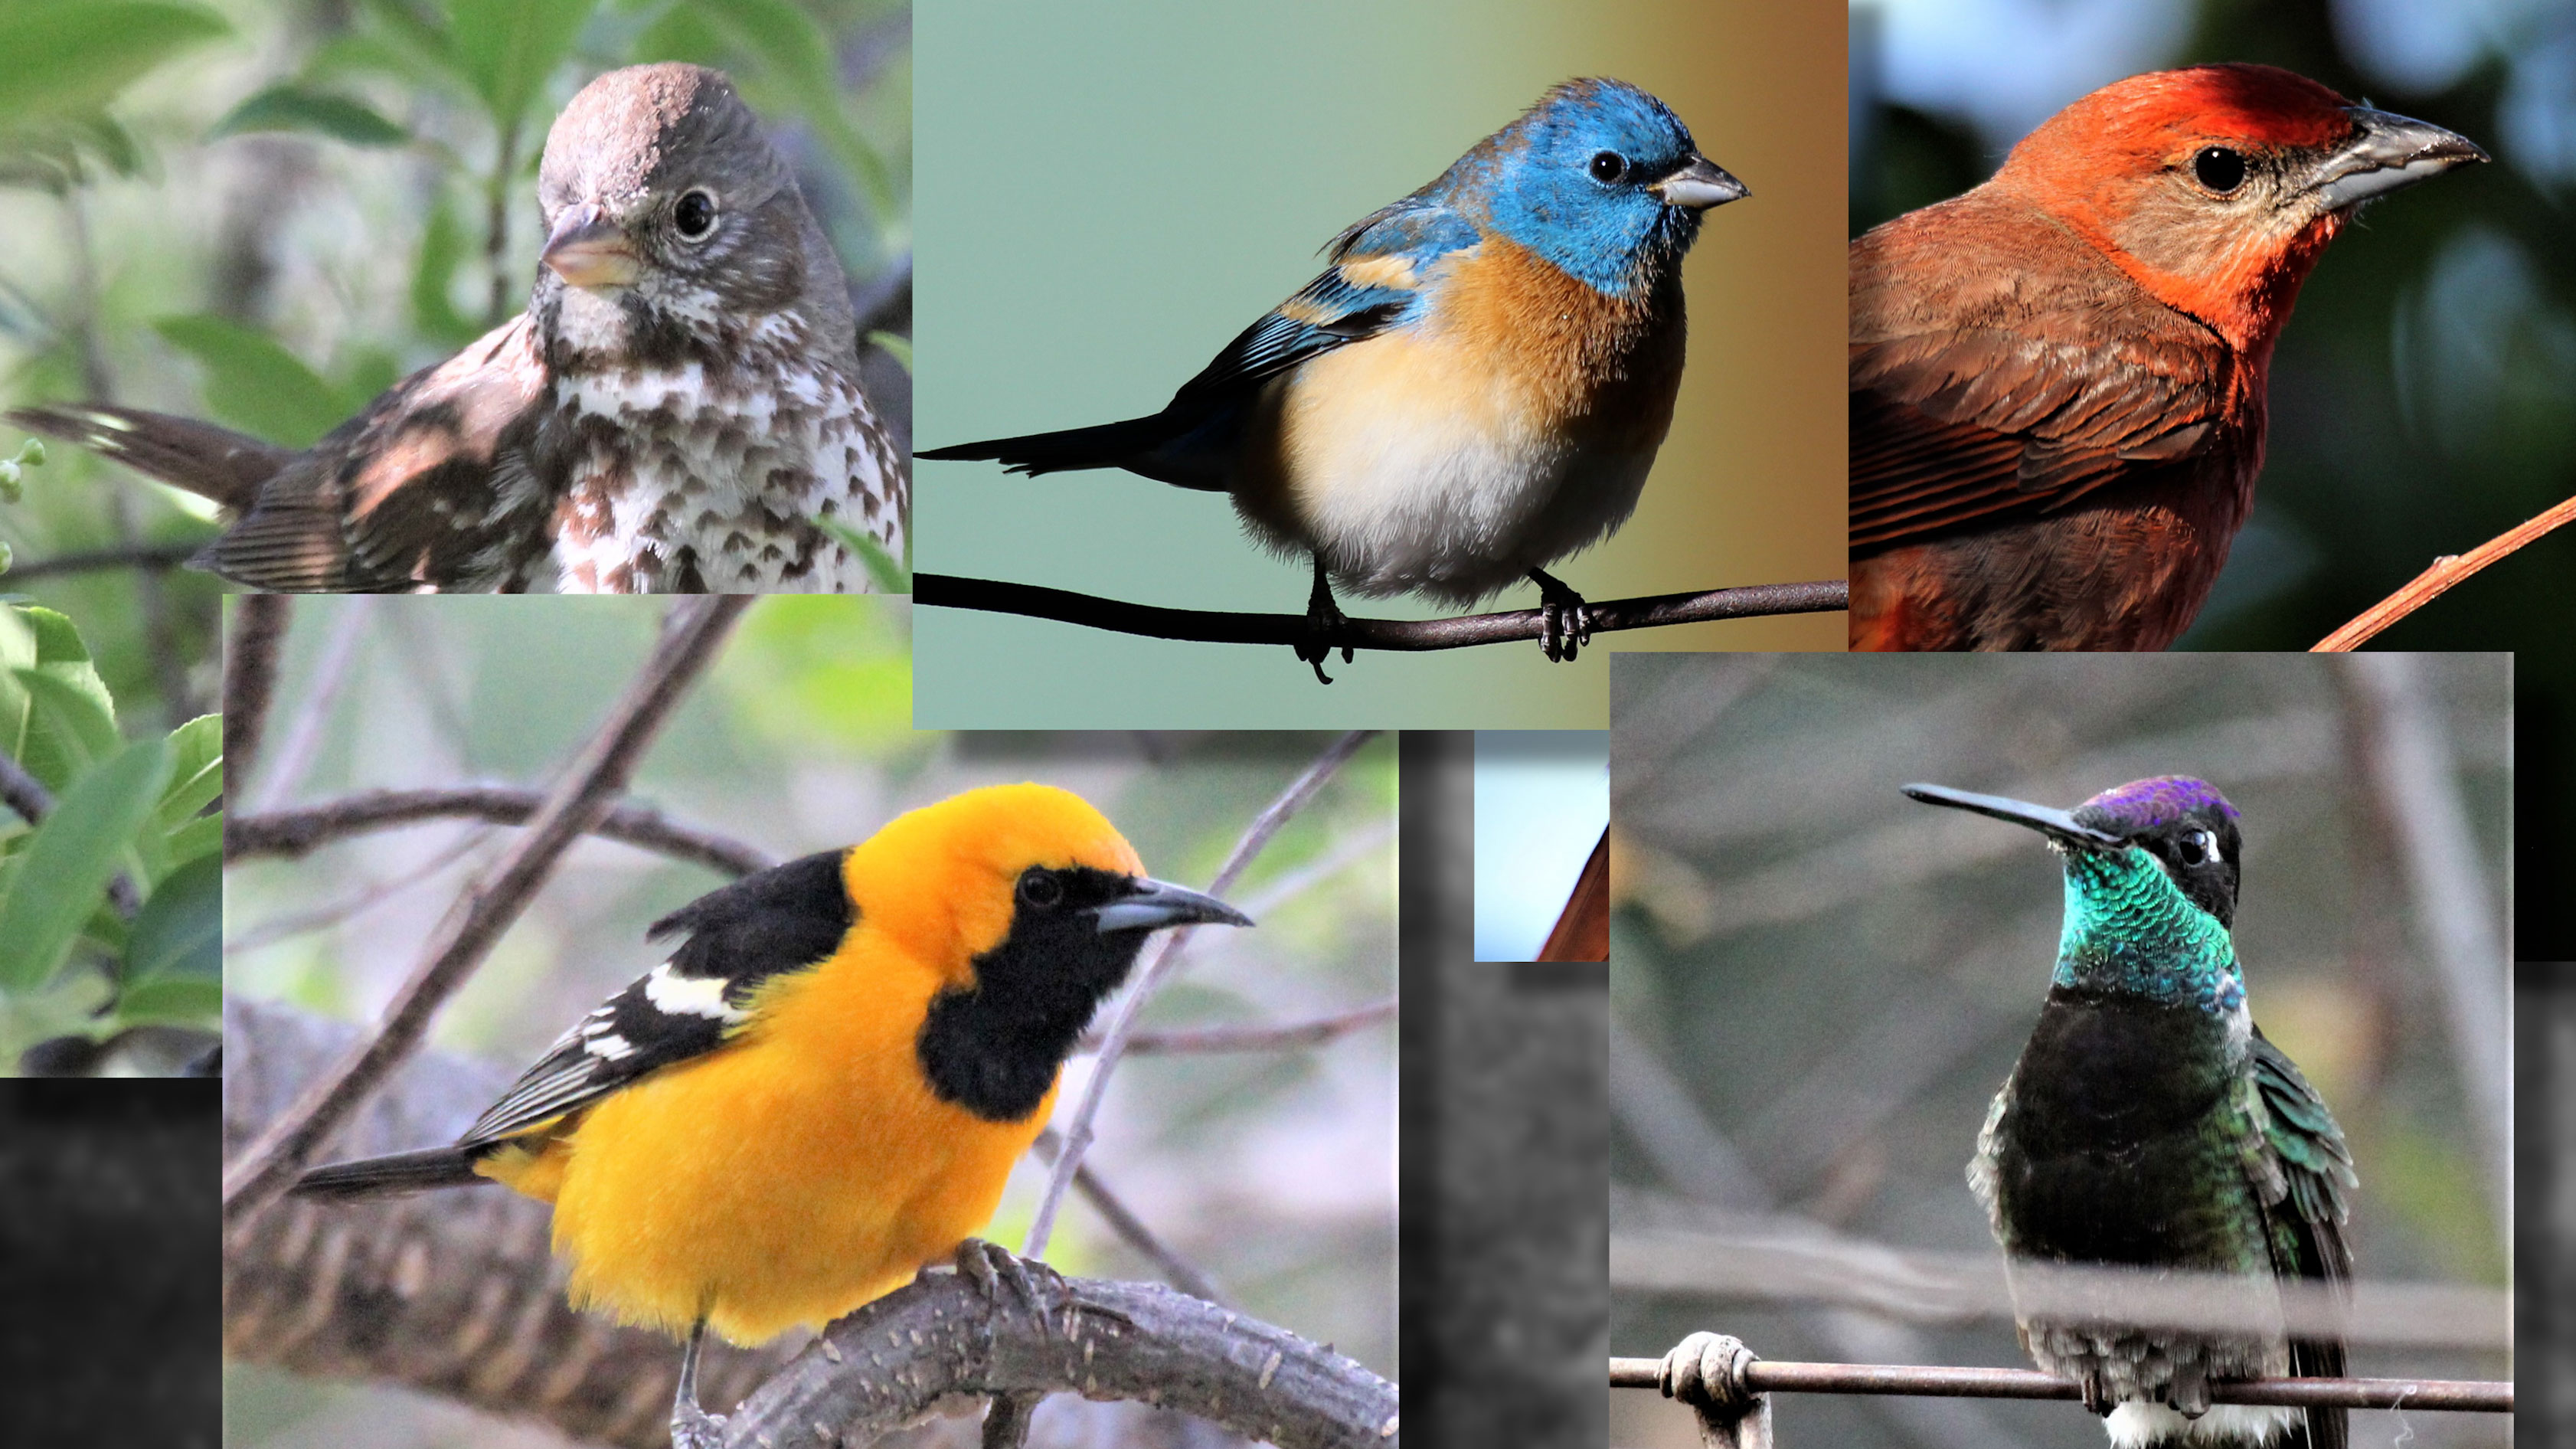 These are some of dozens of species that Ken Lamberton has photographed on his property near Bisbee, AZ.